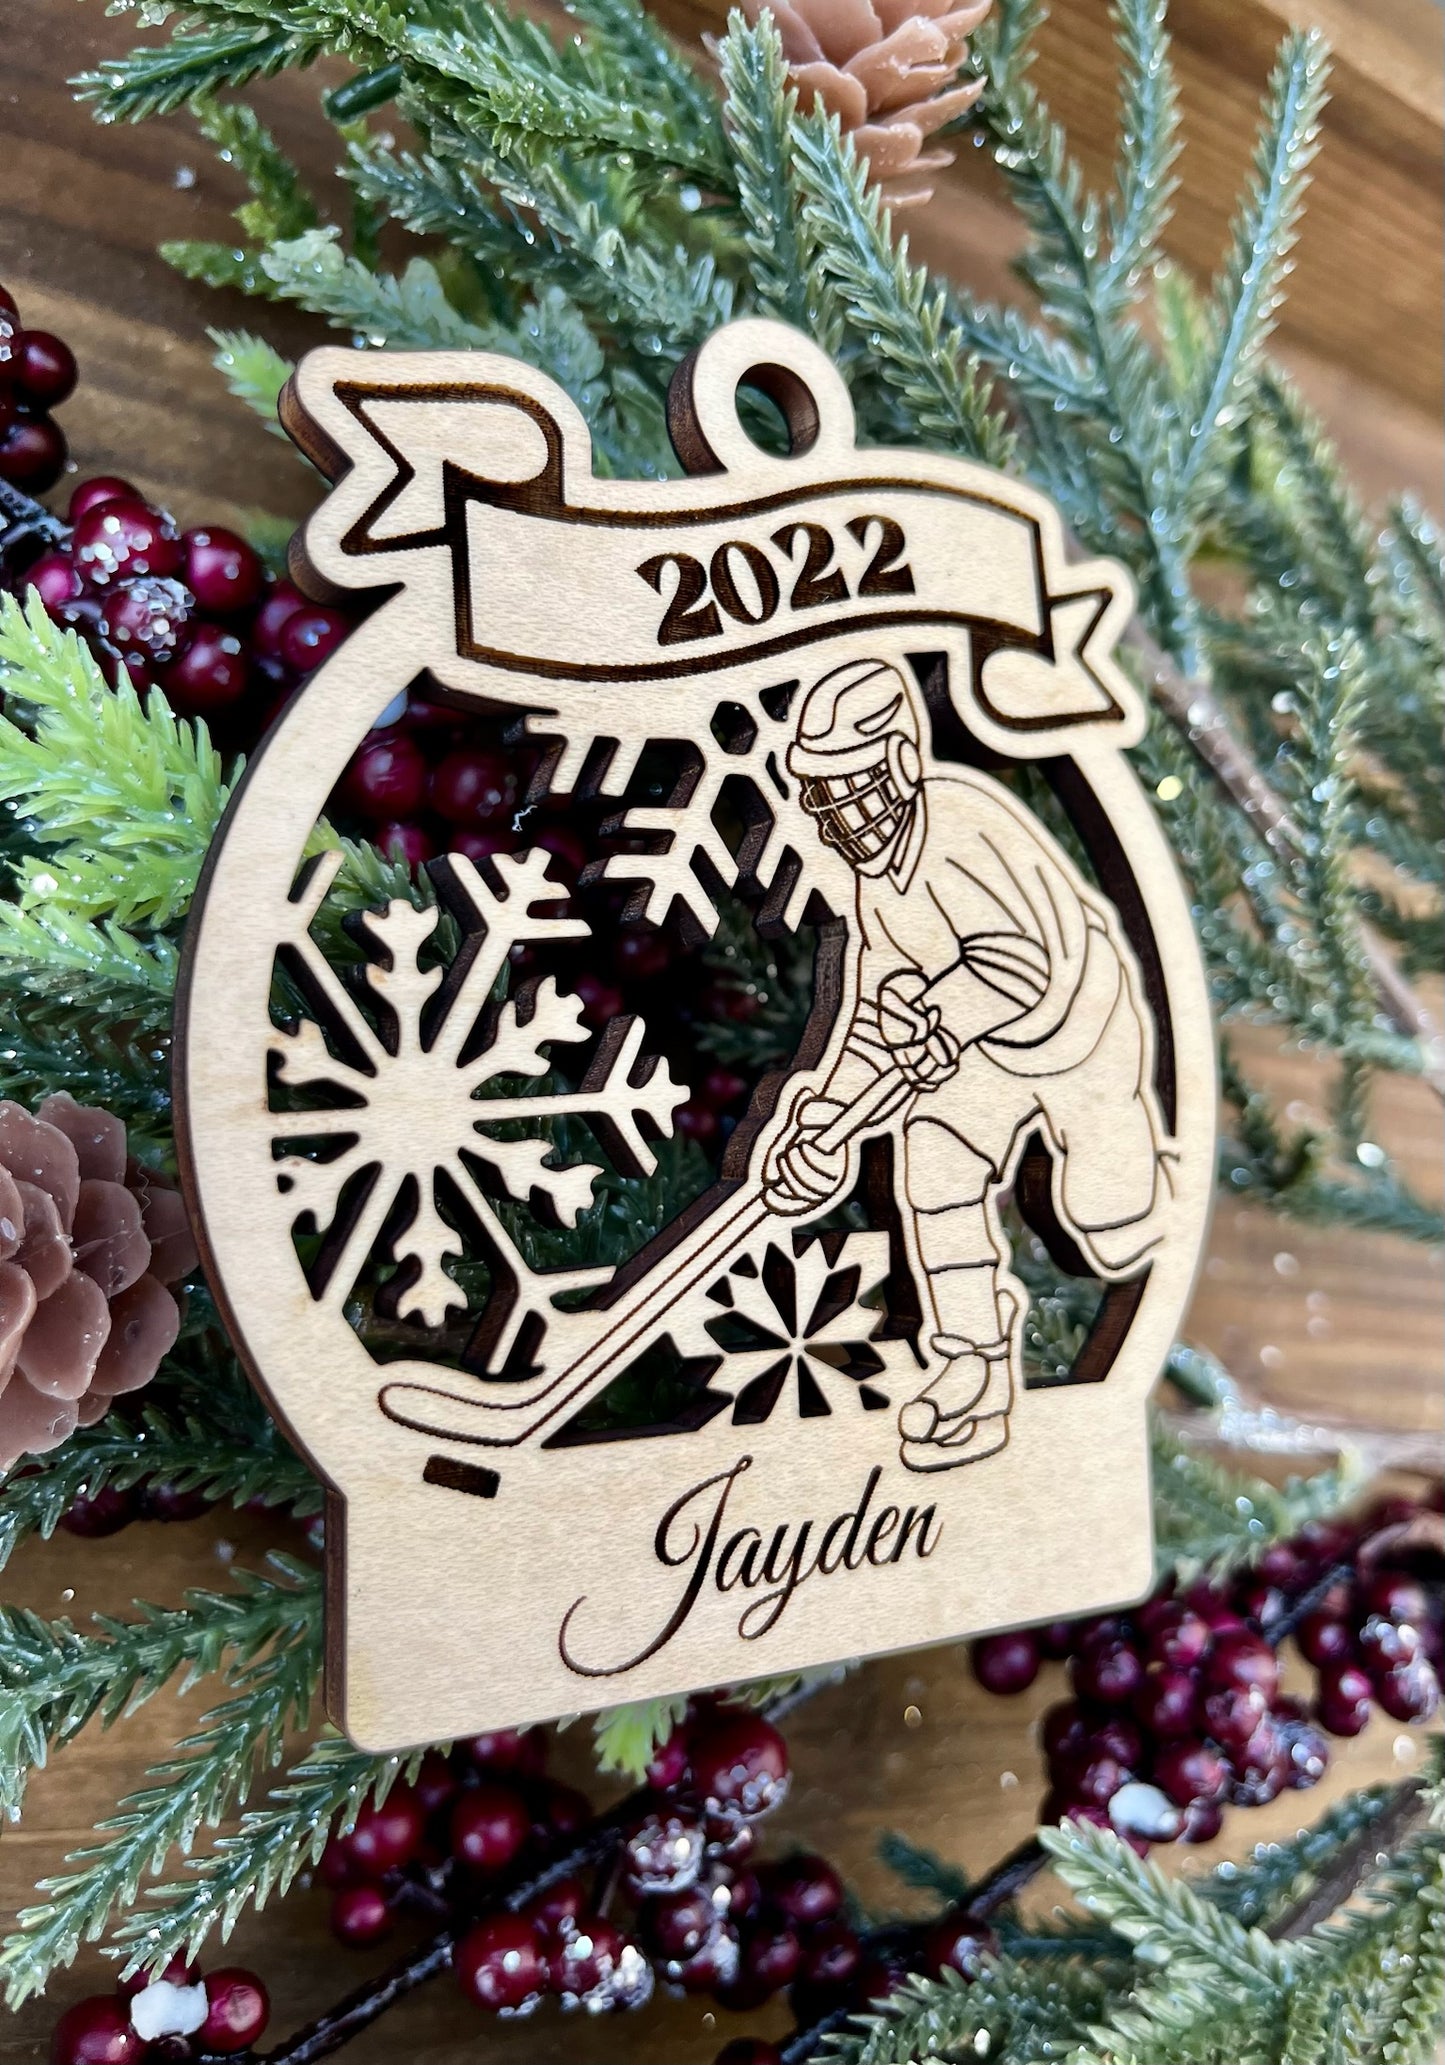 PERSONALIZED HOCKEY PLAYER ORNAMENT